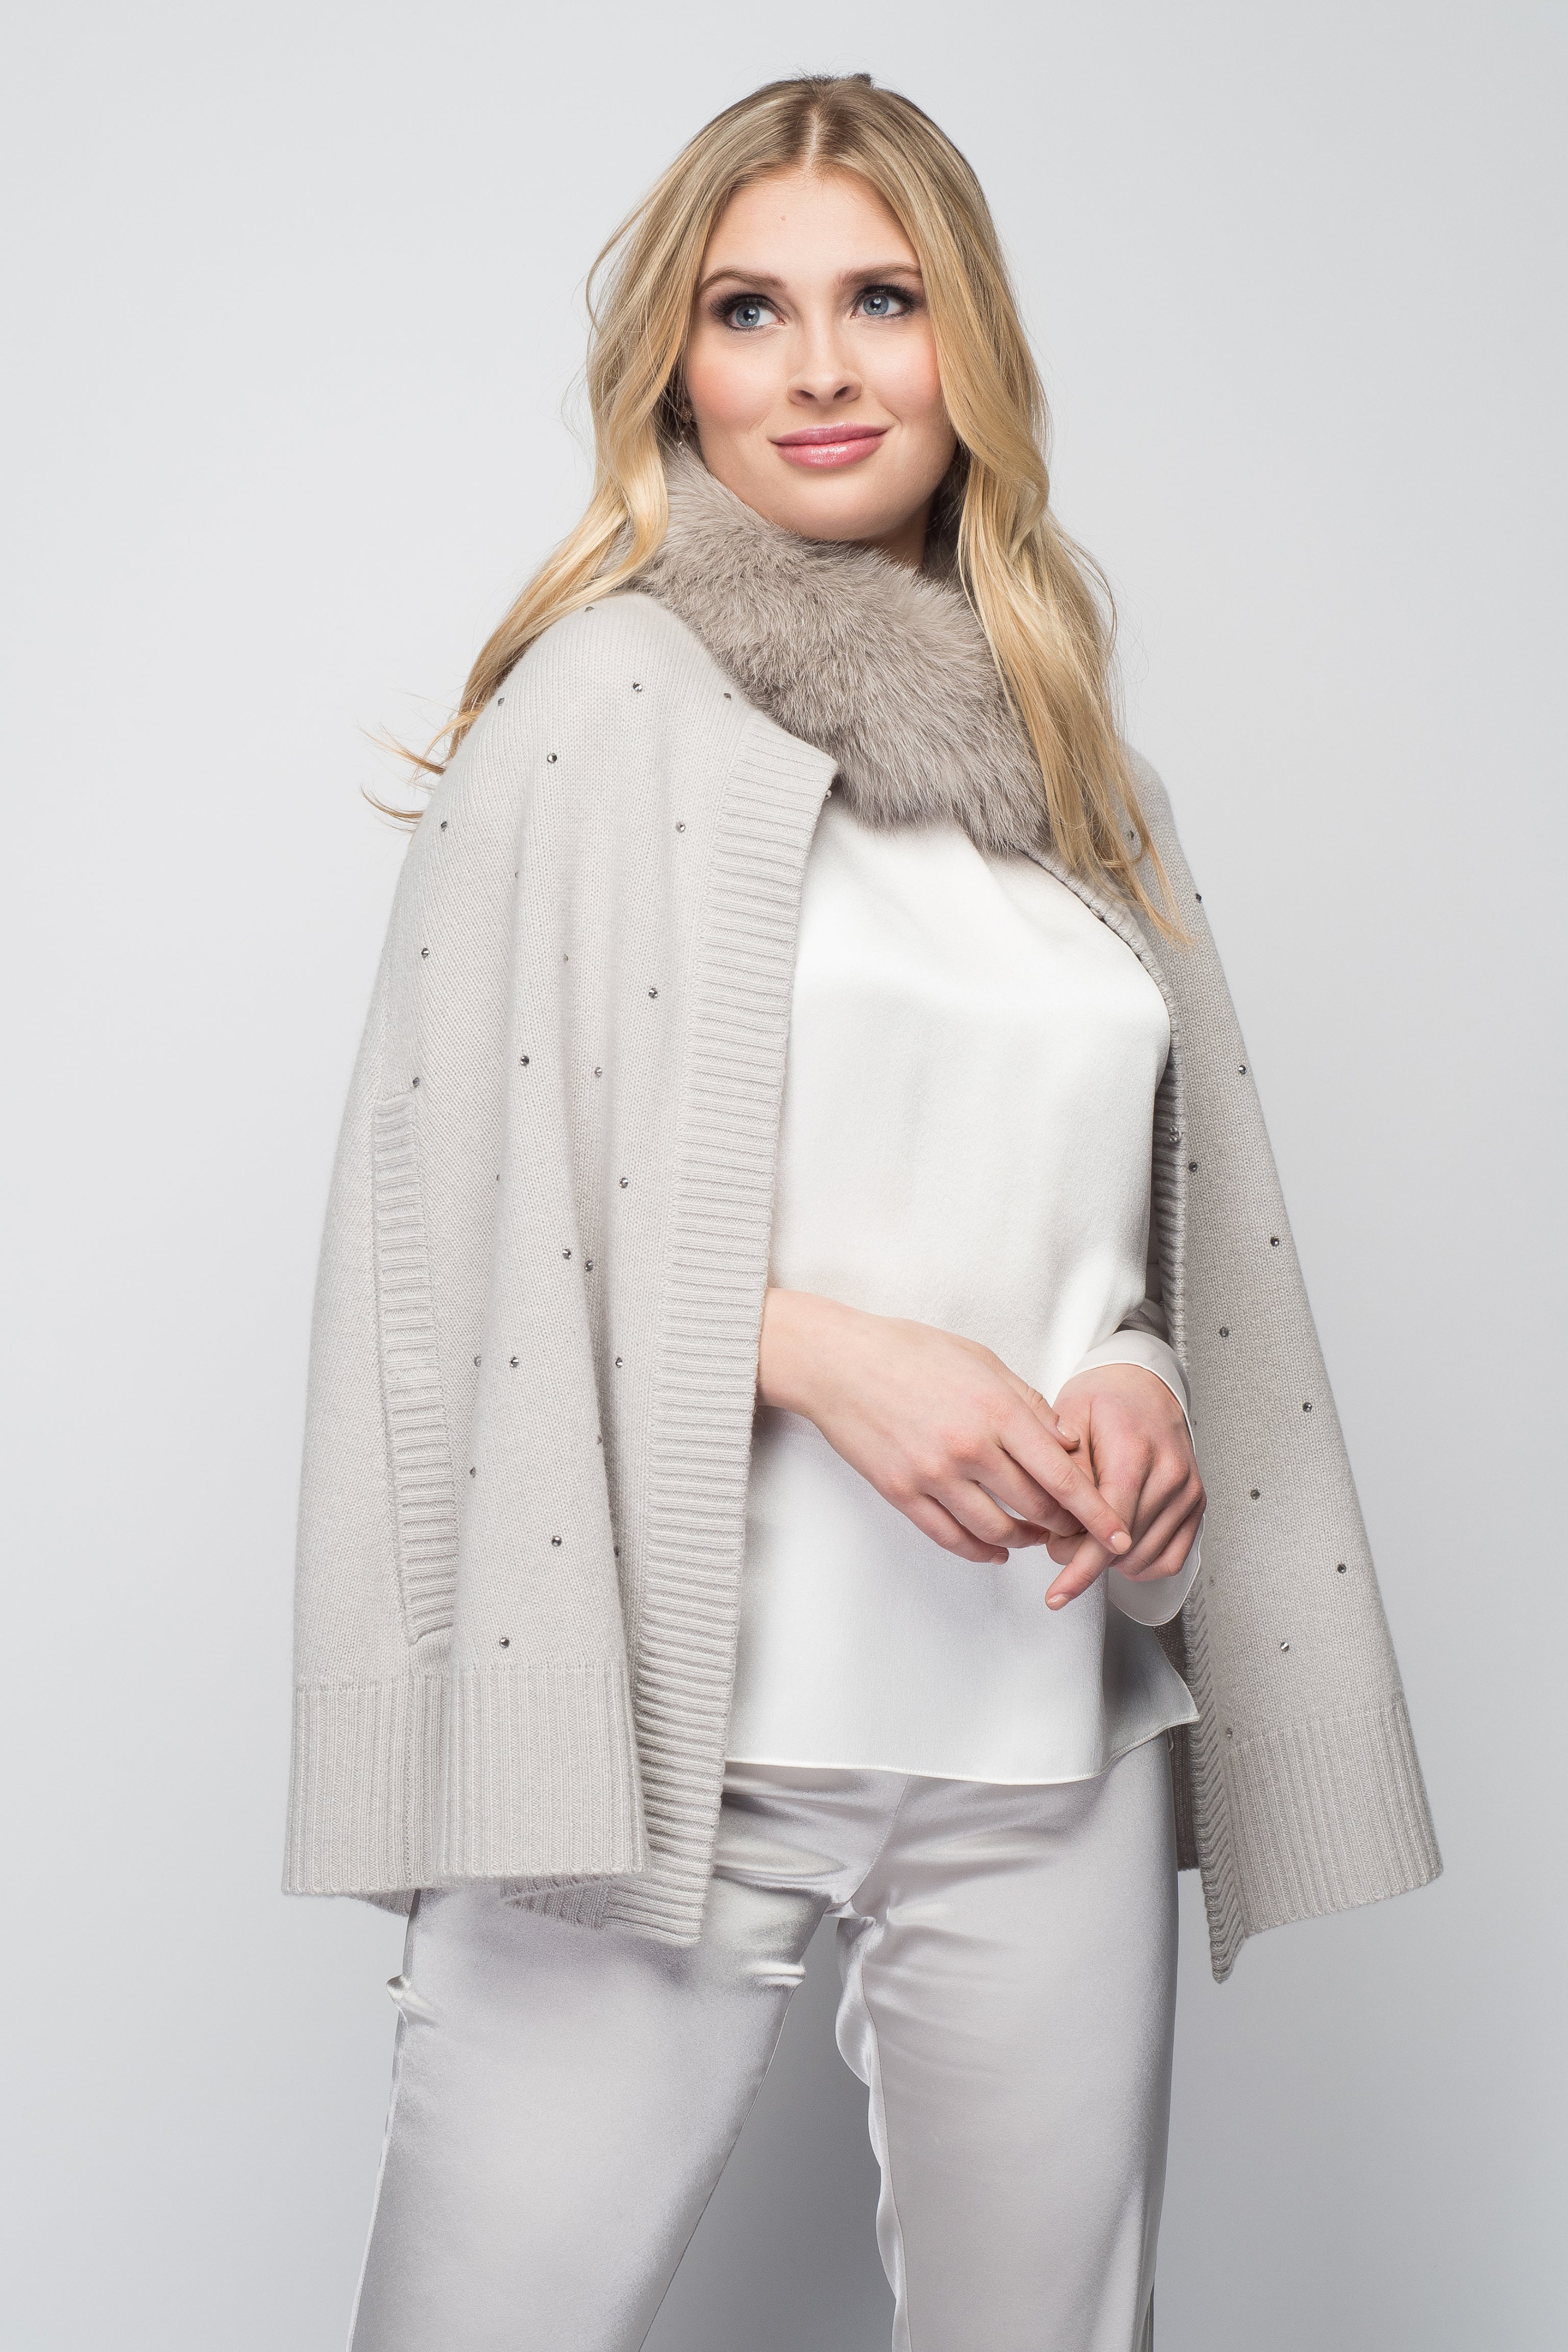 Cashmere Swing Poncho with Fox & Crystals in Dove Gray